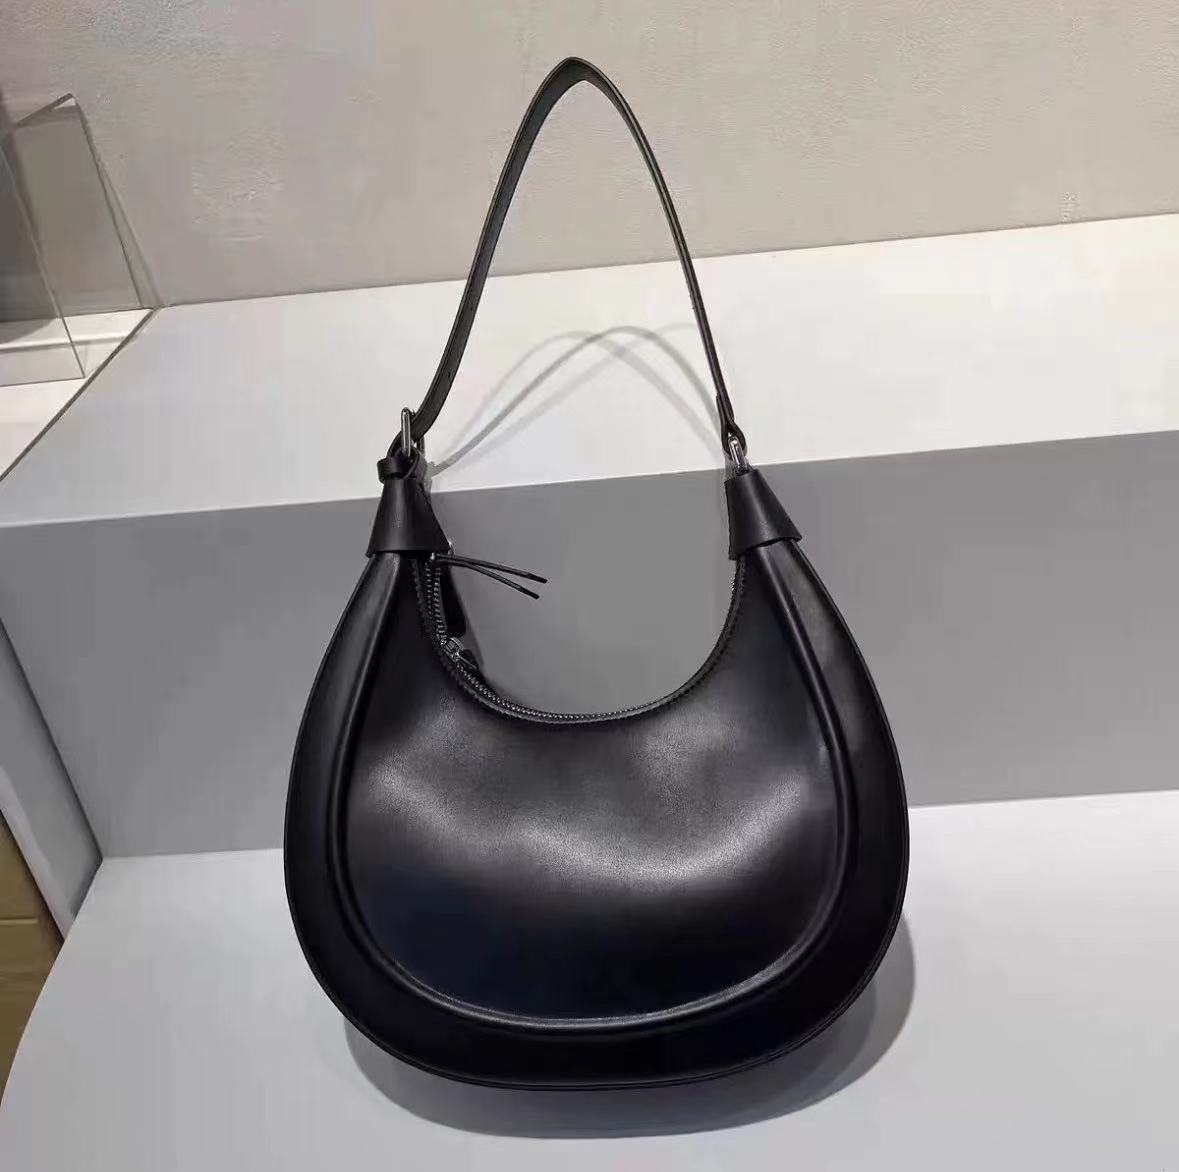 Women's Genuine Leather Hobo Baguette Bags photo review